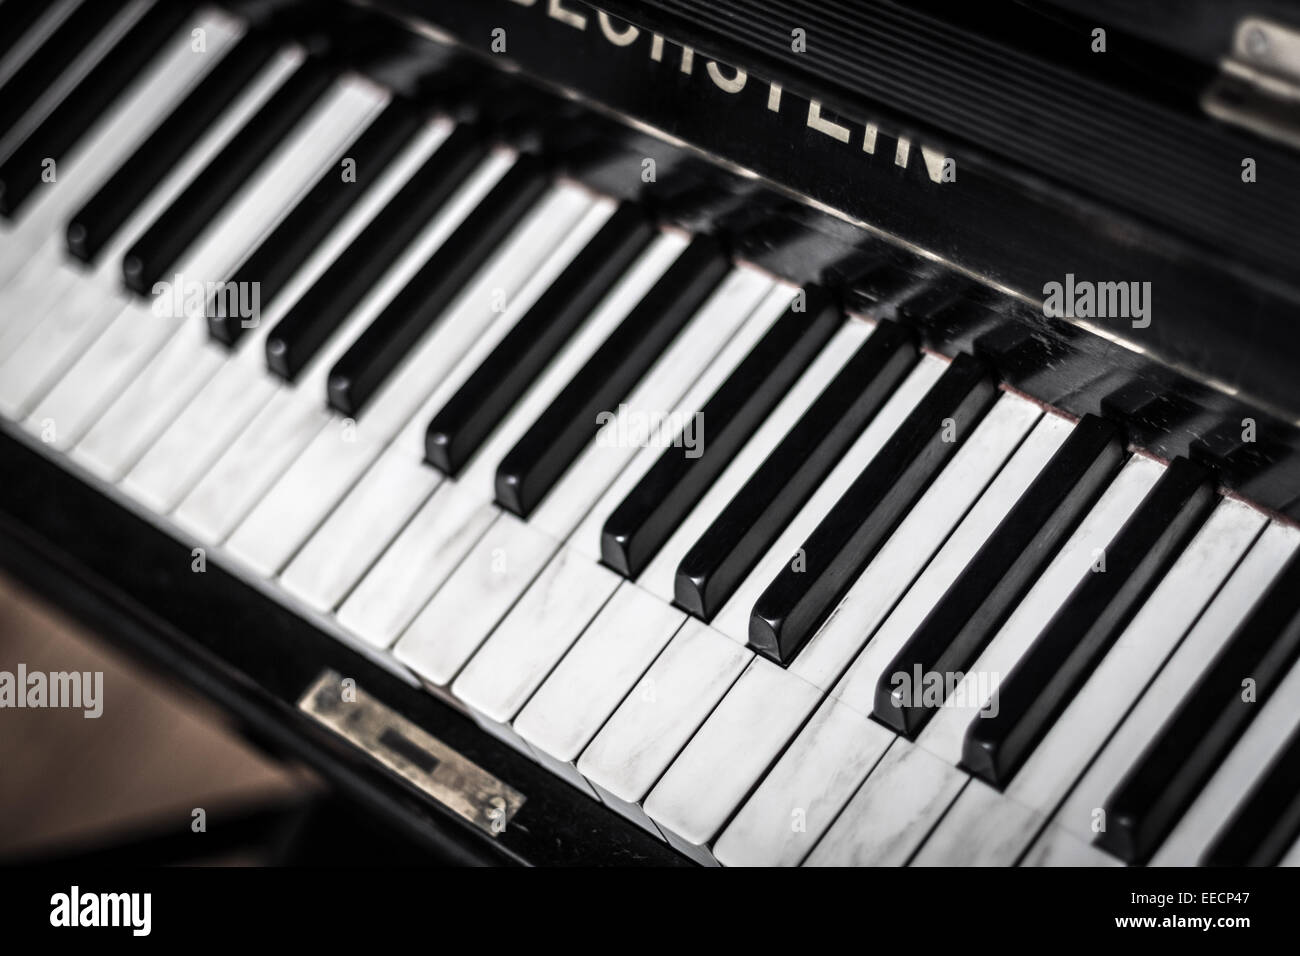 Keyboard of a vintage 1800's piano Stock Photo